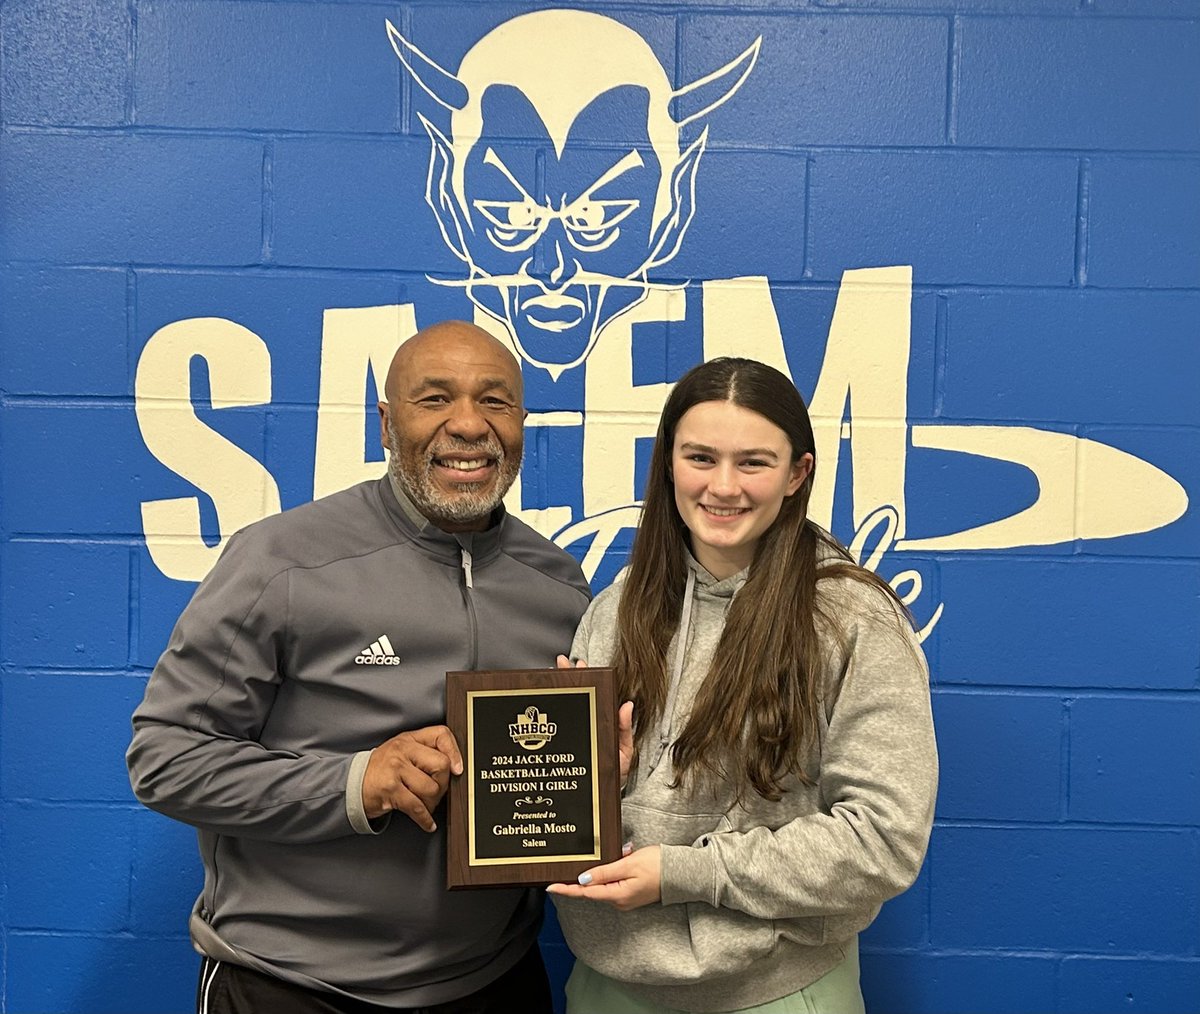 Congratulations to Gabriella Mosto for winning the NHBCO Jack Ford Award for DI girls basketball. The award is given to players who excelled in basketball, grades and citizenship/community service.